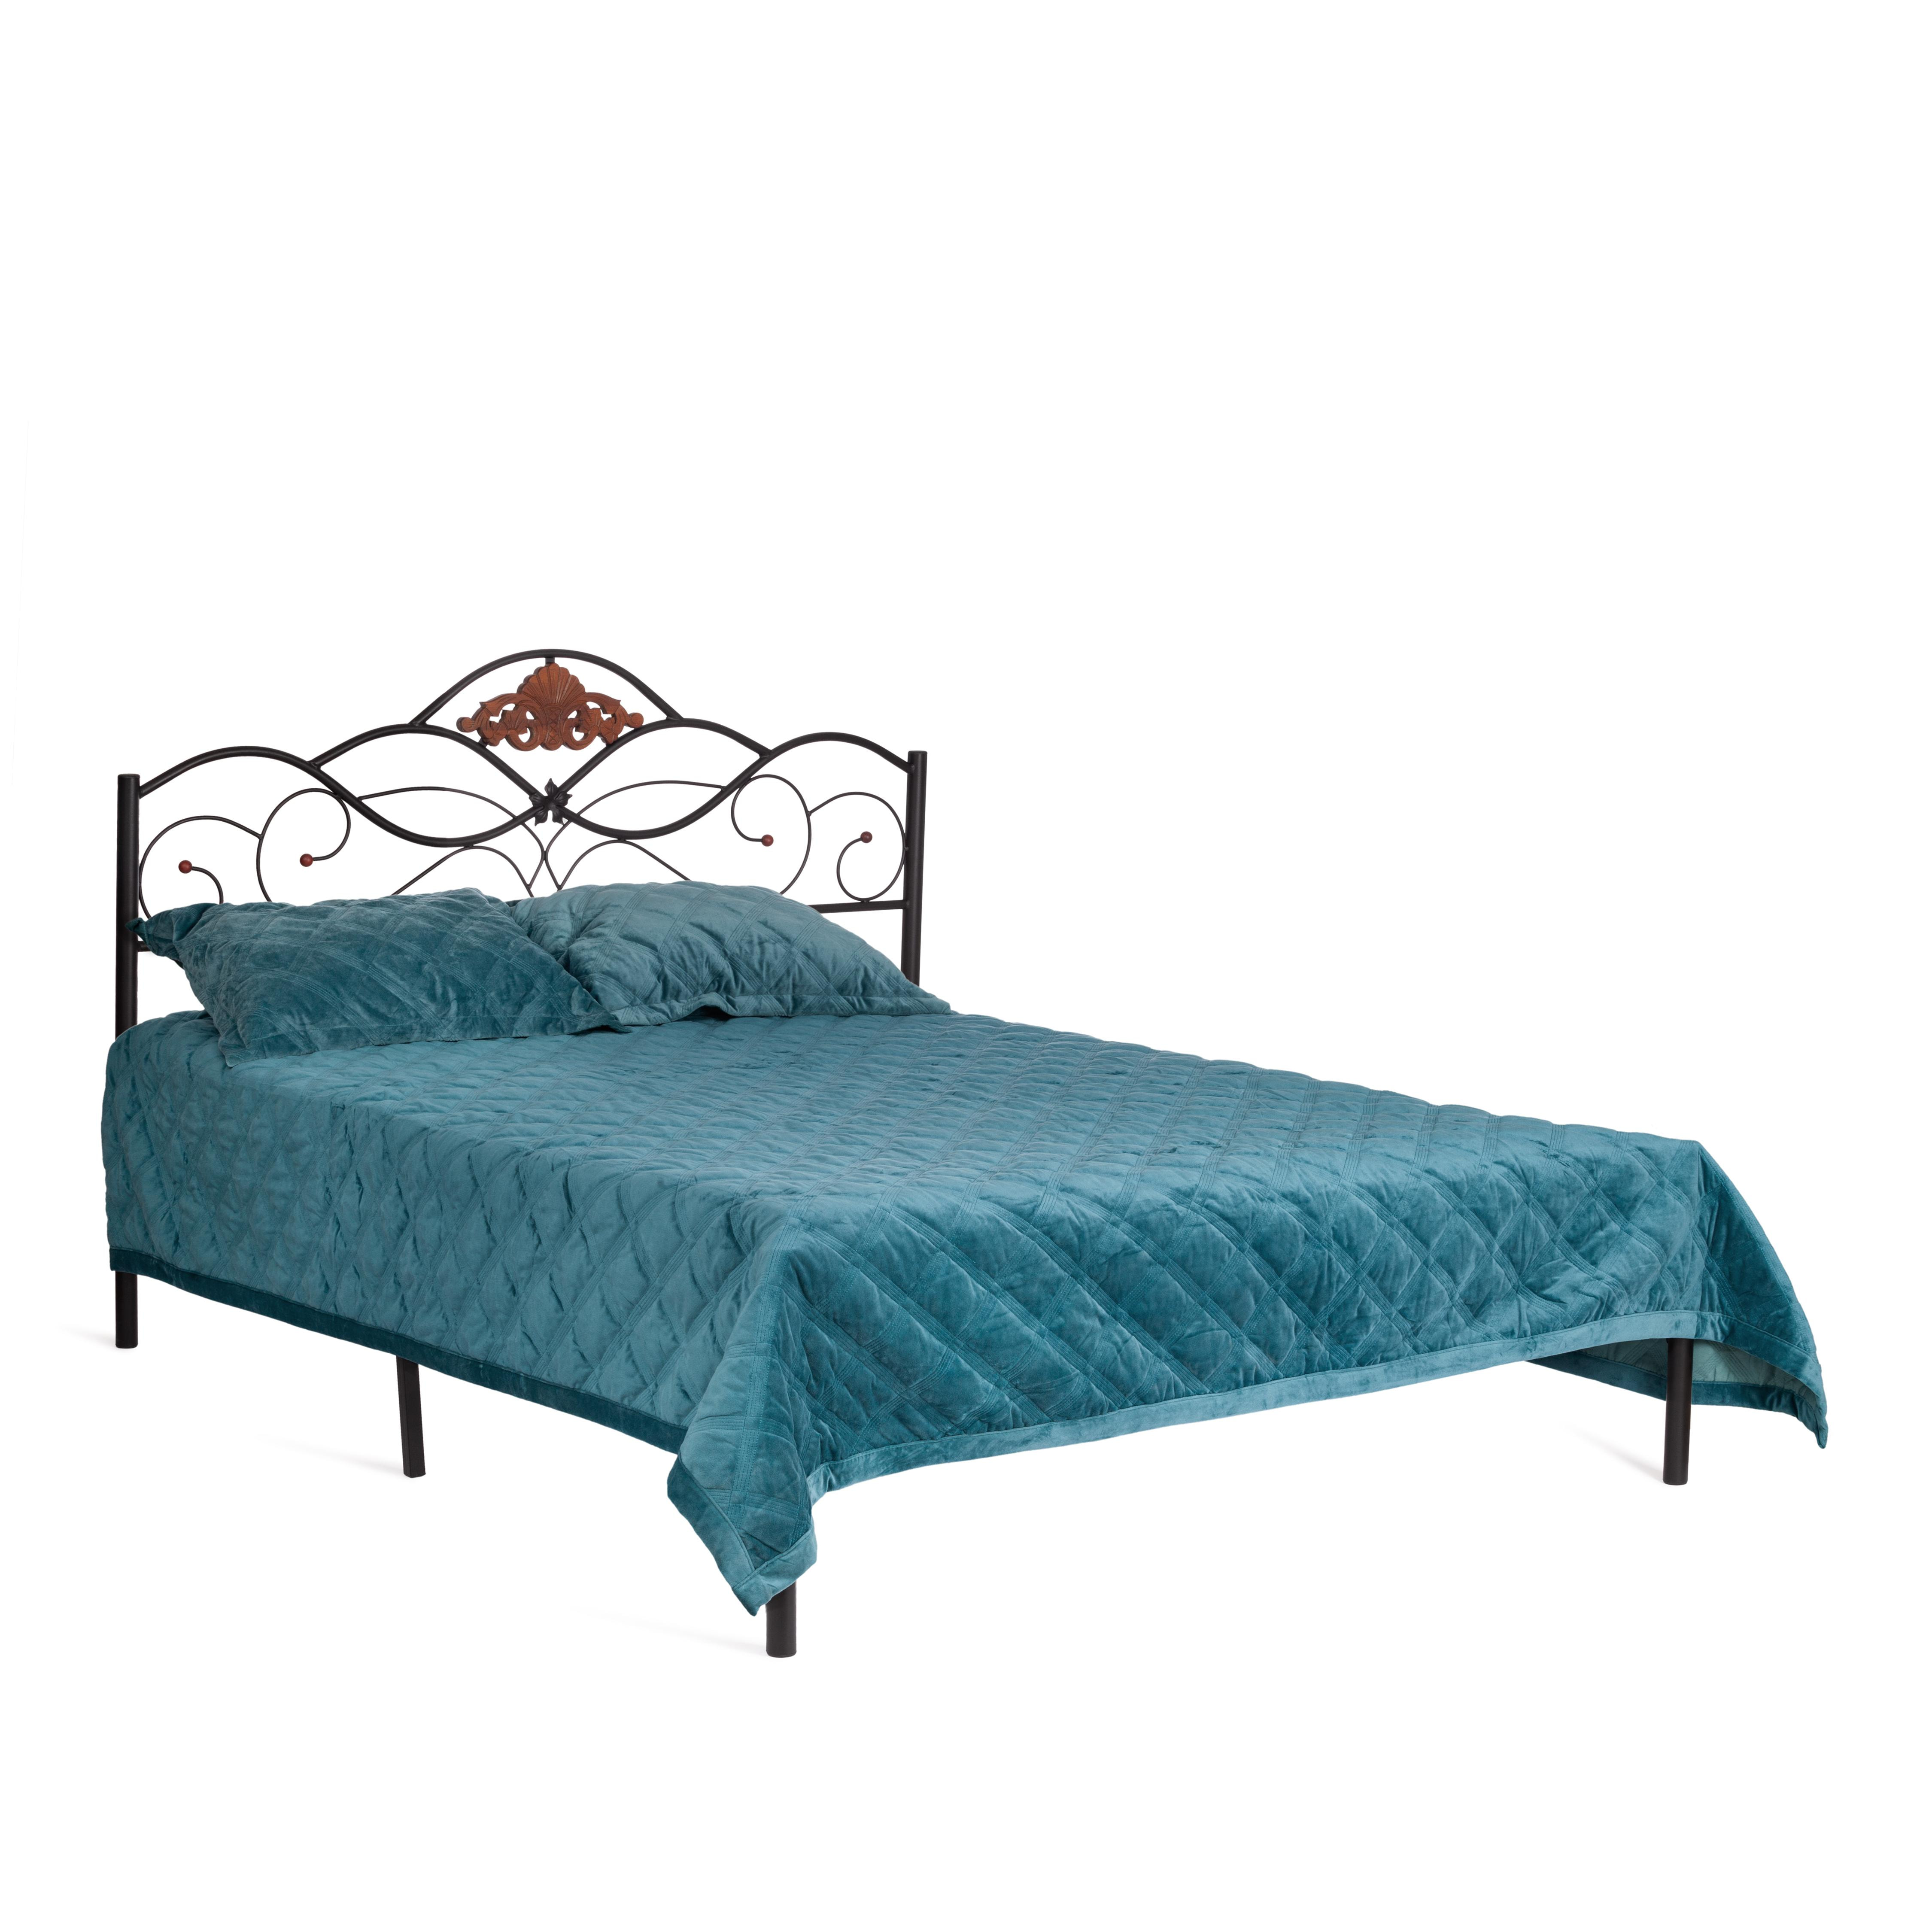  TetChair Federica AT-881 Queen bed, 160x200,  , 